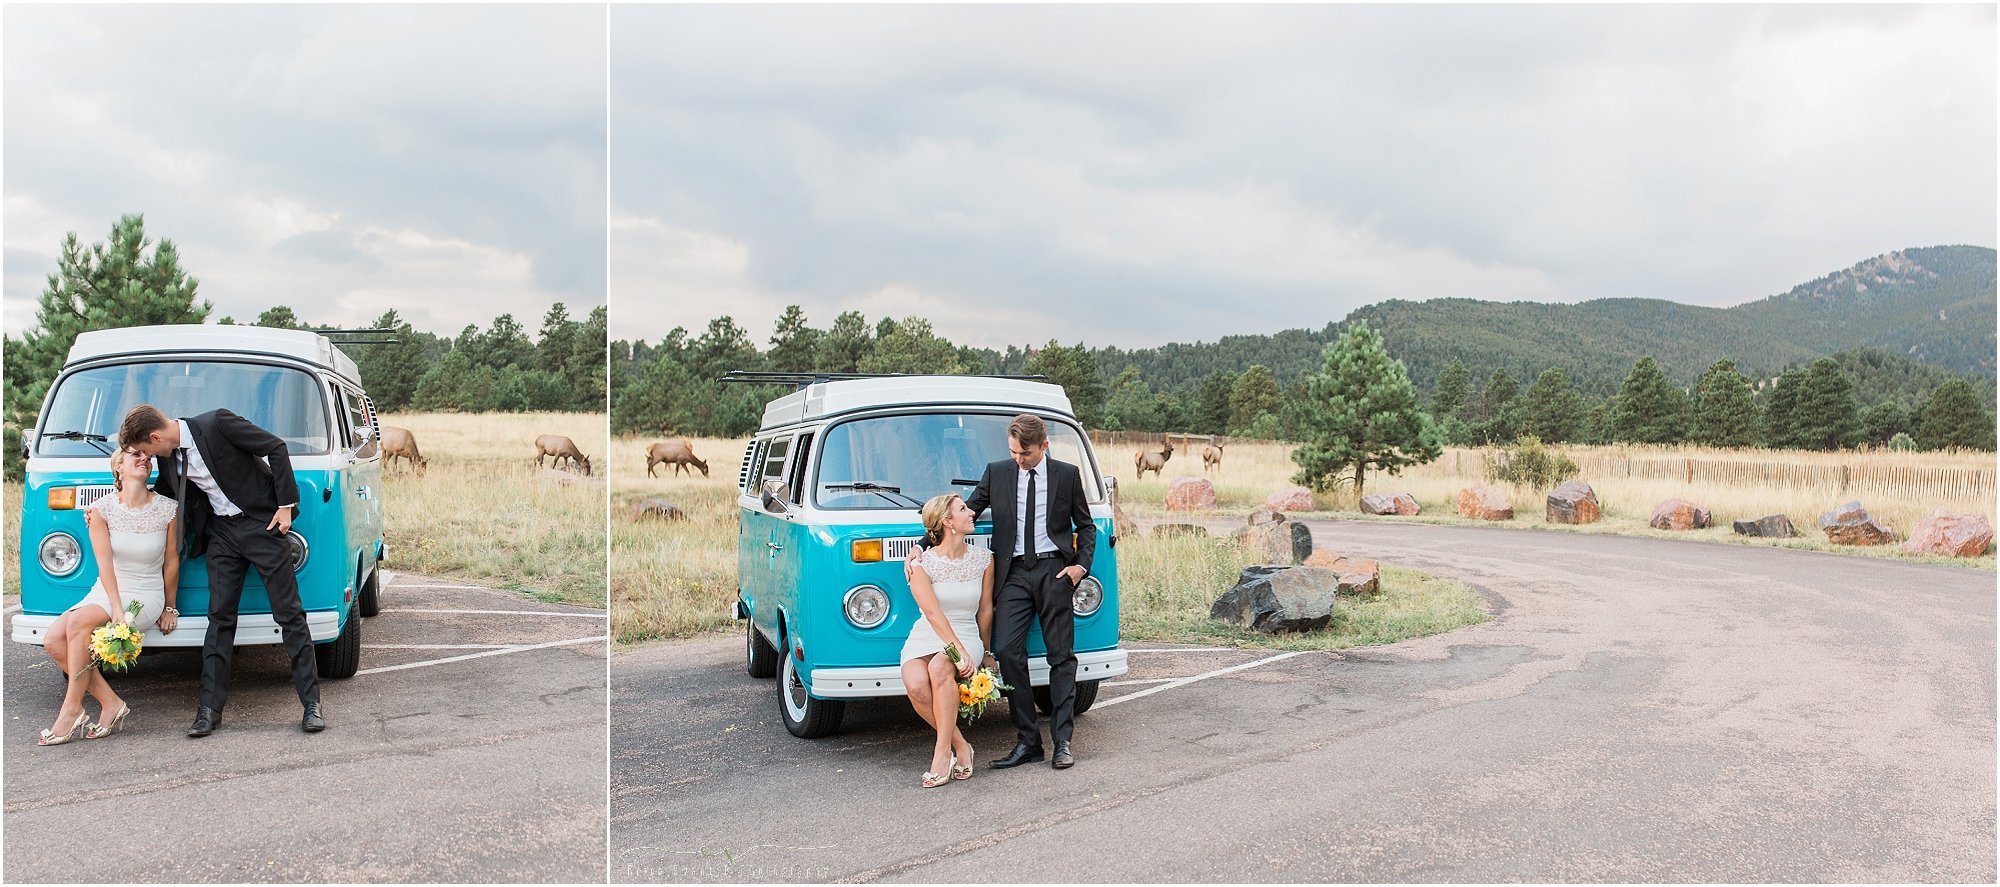 A gorgeous wedding couple poses in front of a VW van as a herd of elk wanders through the open space in the background of this Evergreen CO photographer shootout event. 